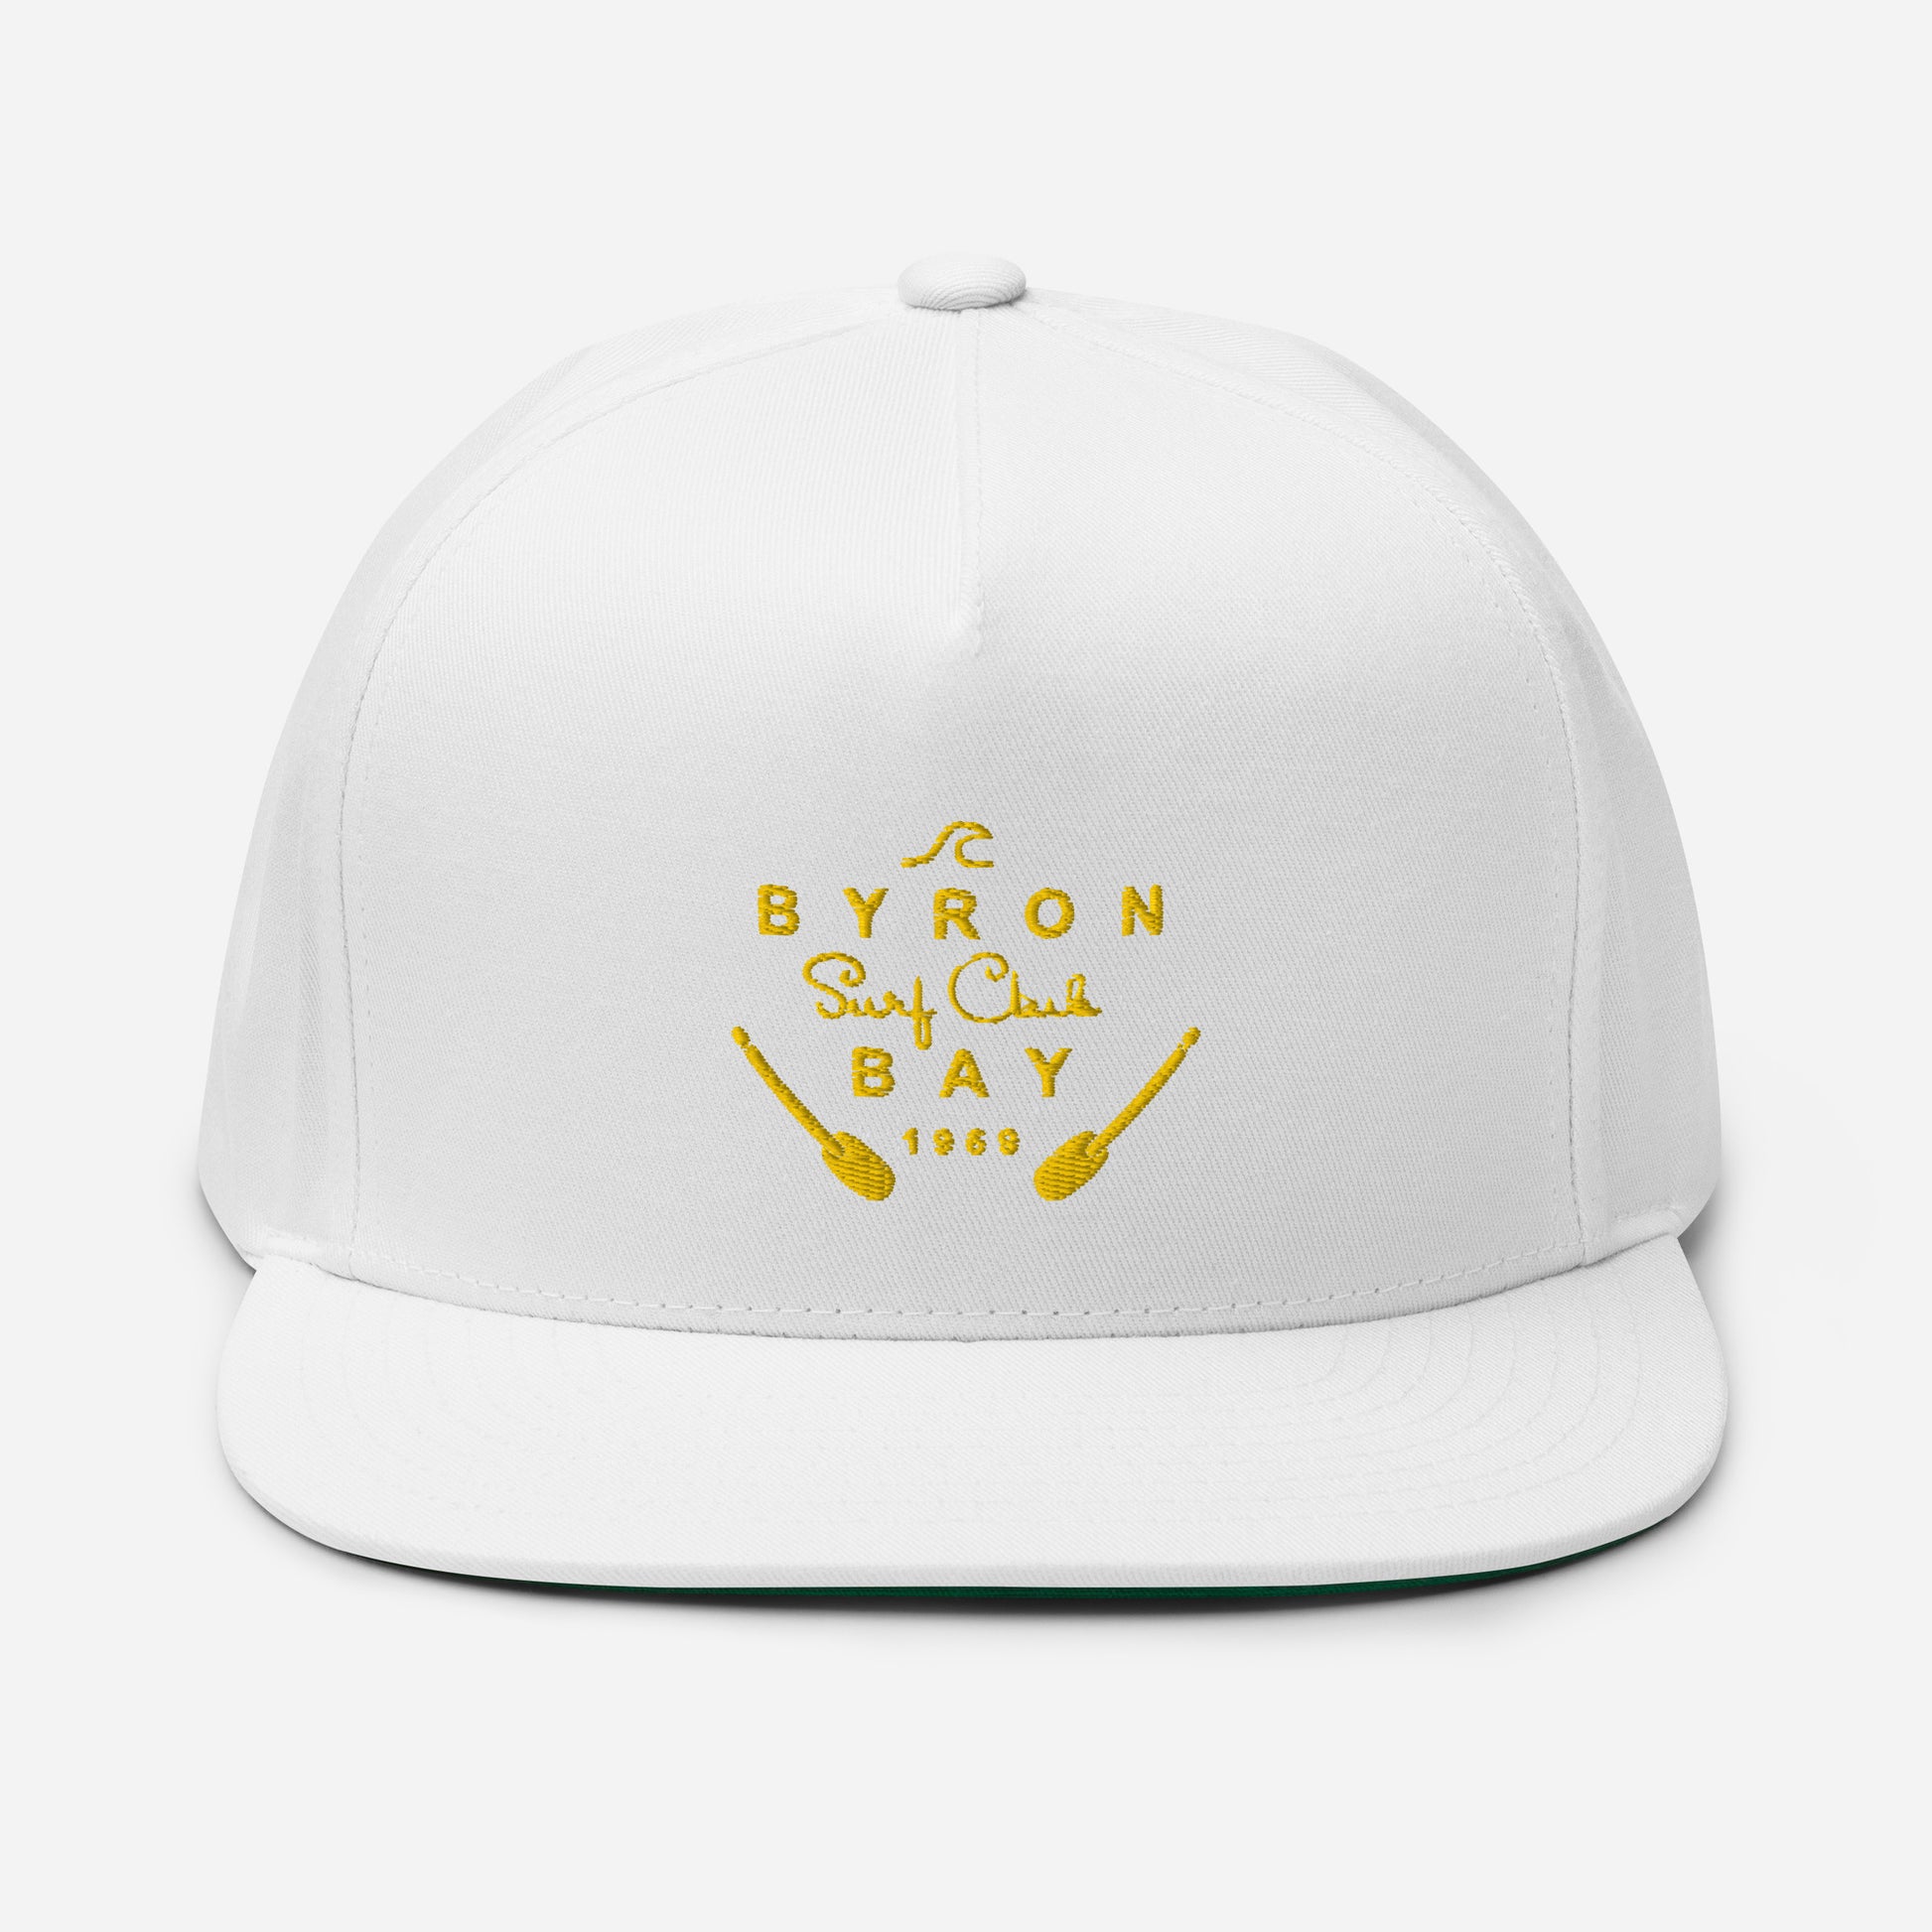  Flat Bill Cap - White - Front view - With yellow Byron Bay Surf Club logo on front - Genuine Byron Bay Merchandise | Produced by Go Sea Kayak Byron Bay 